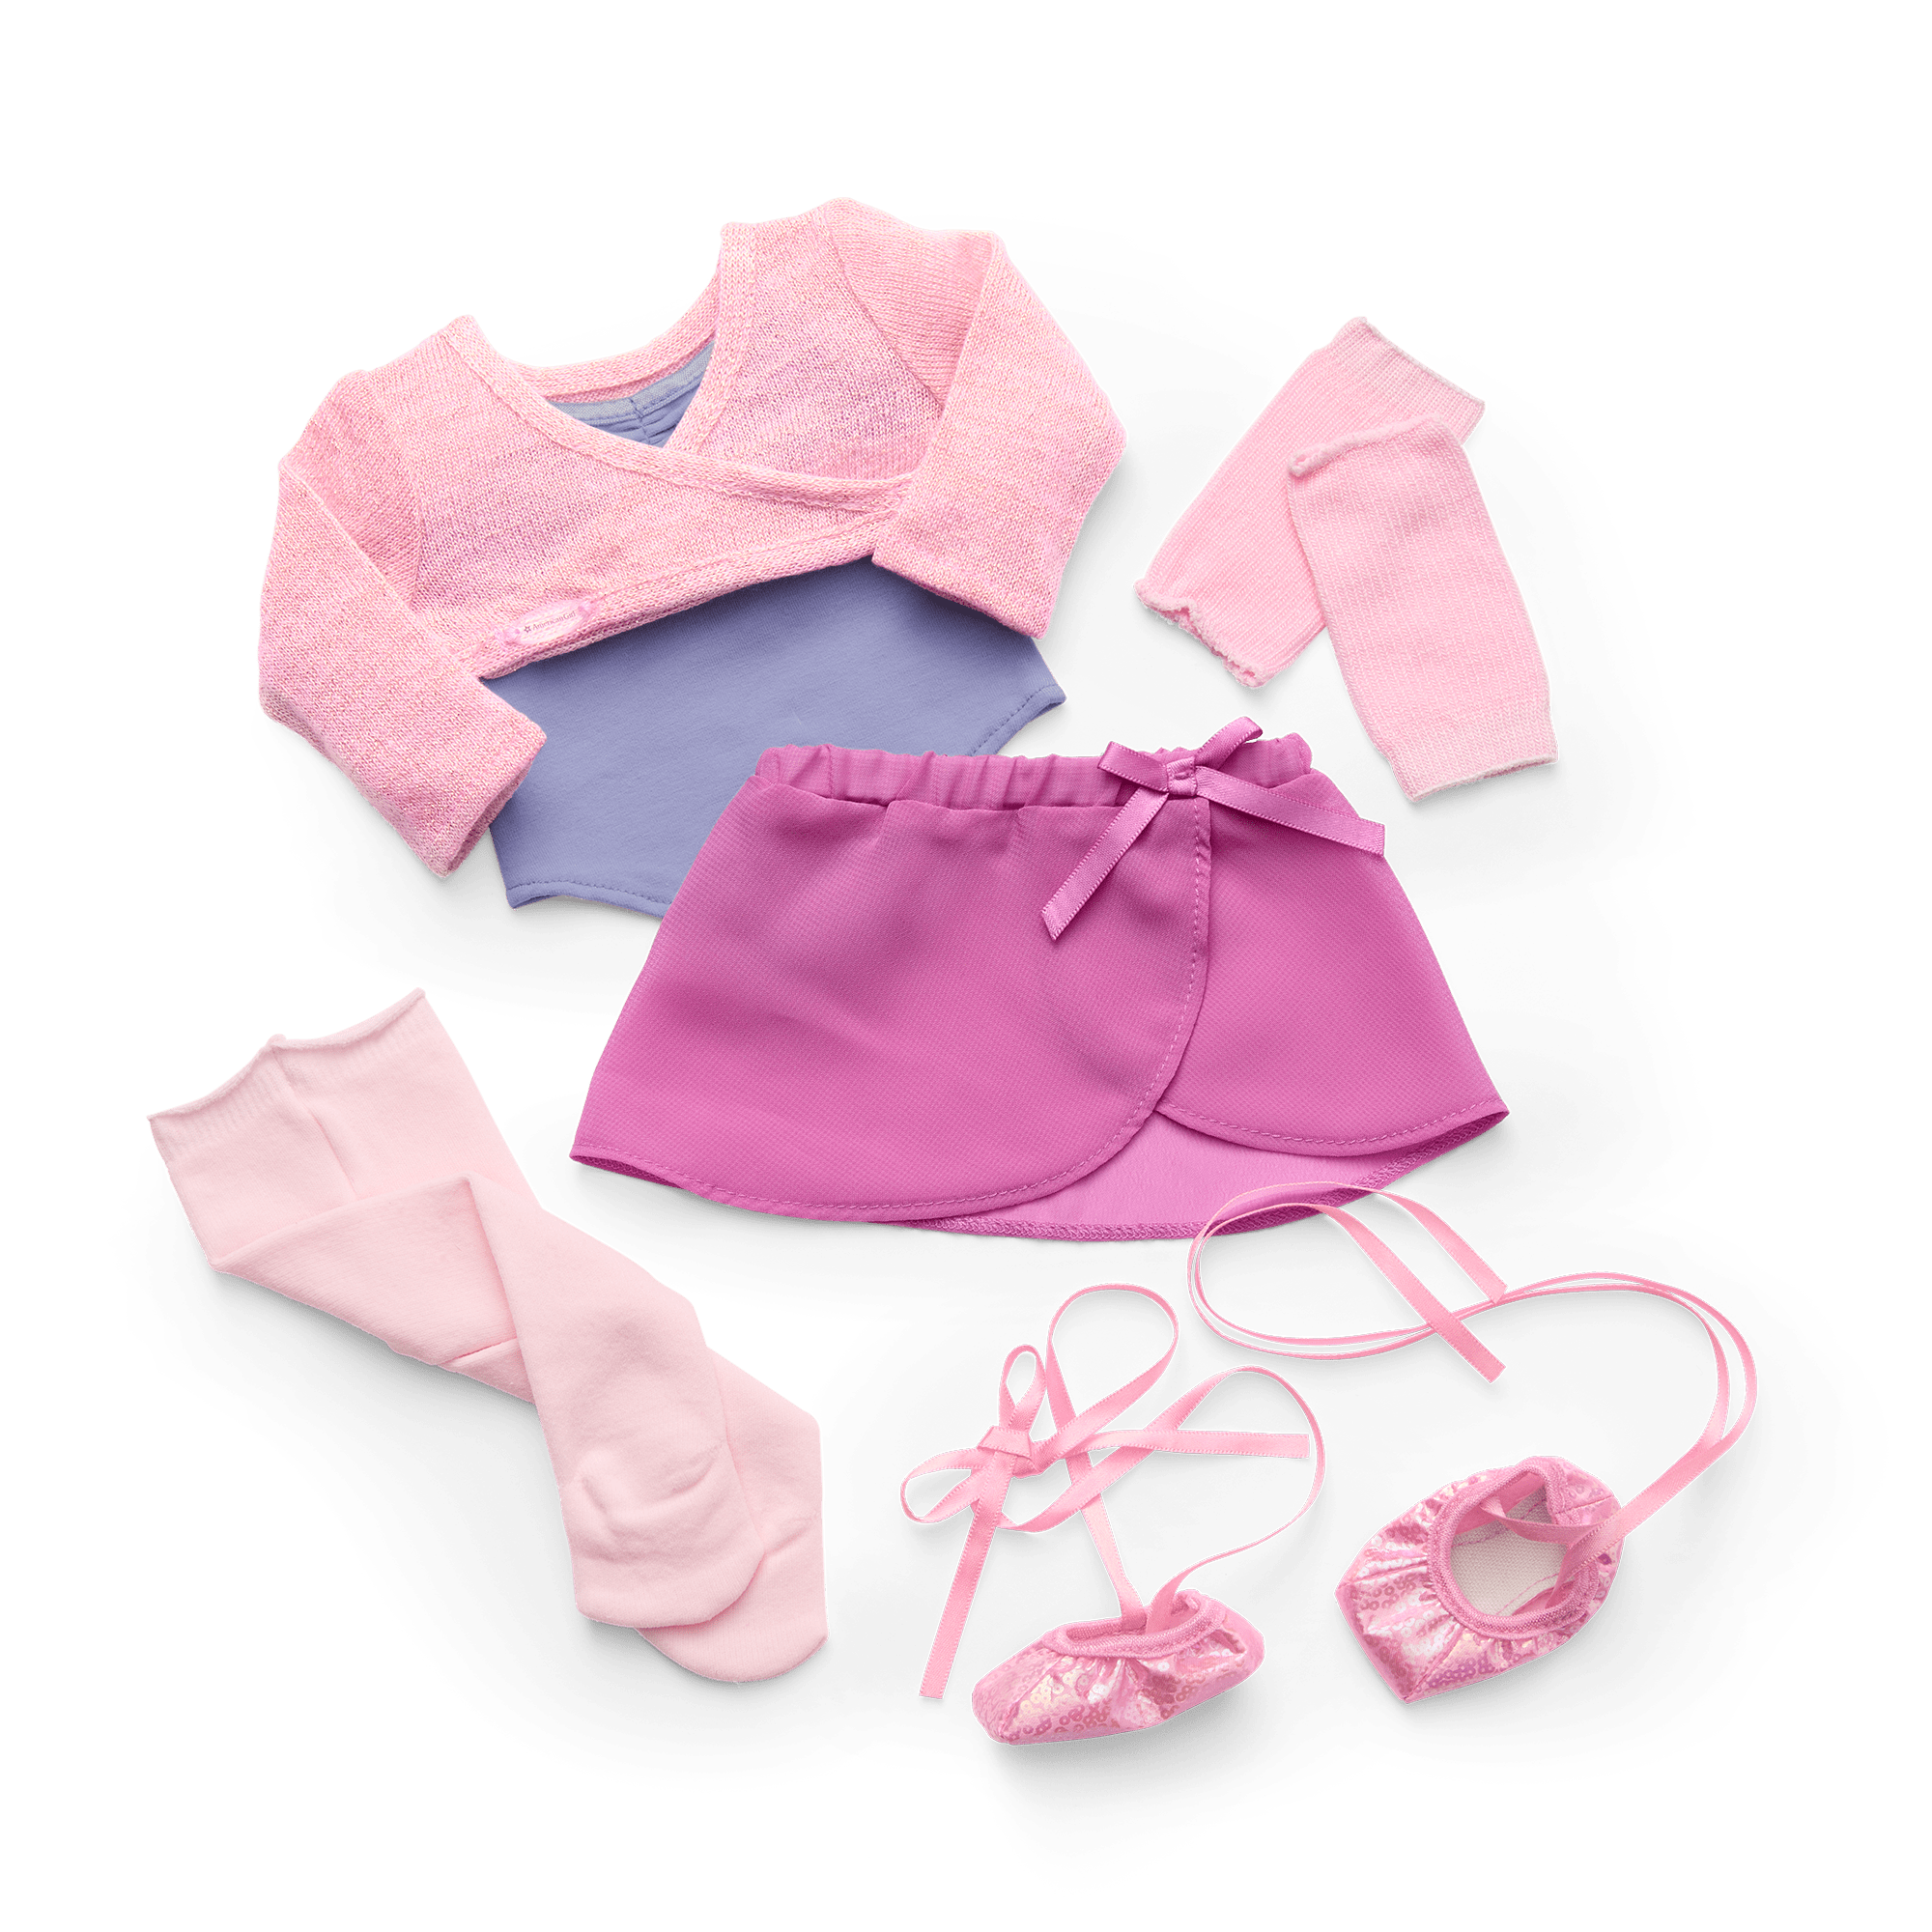 MangoPeaches 18” Doll YOGA Outfit fits American Girl Dolls - 6 Pc DELUXE  Set 